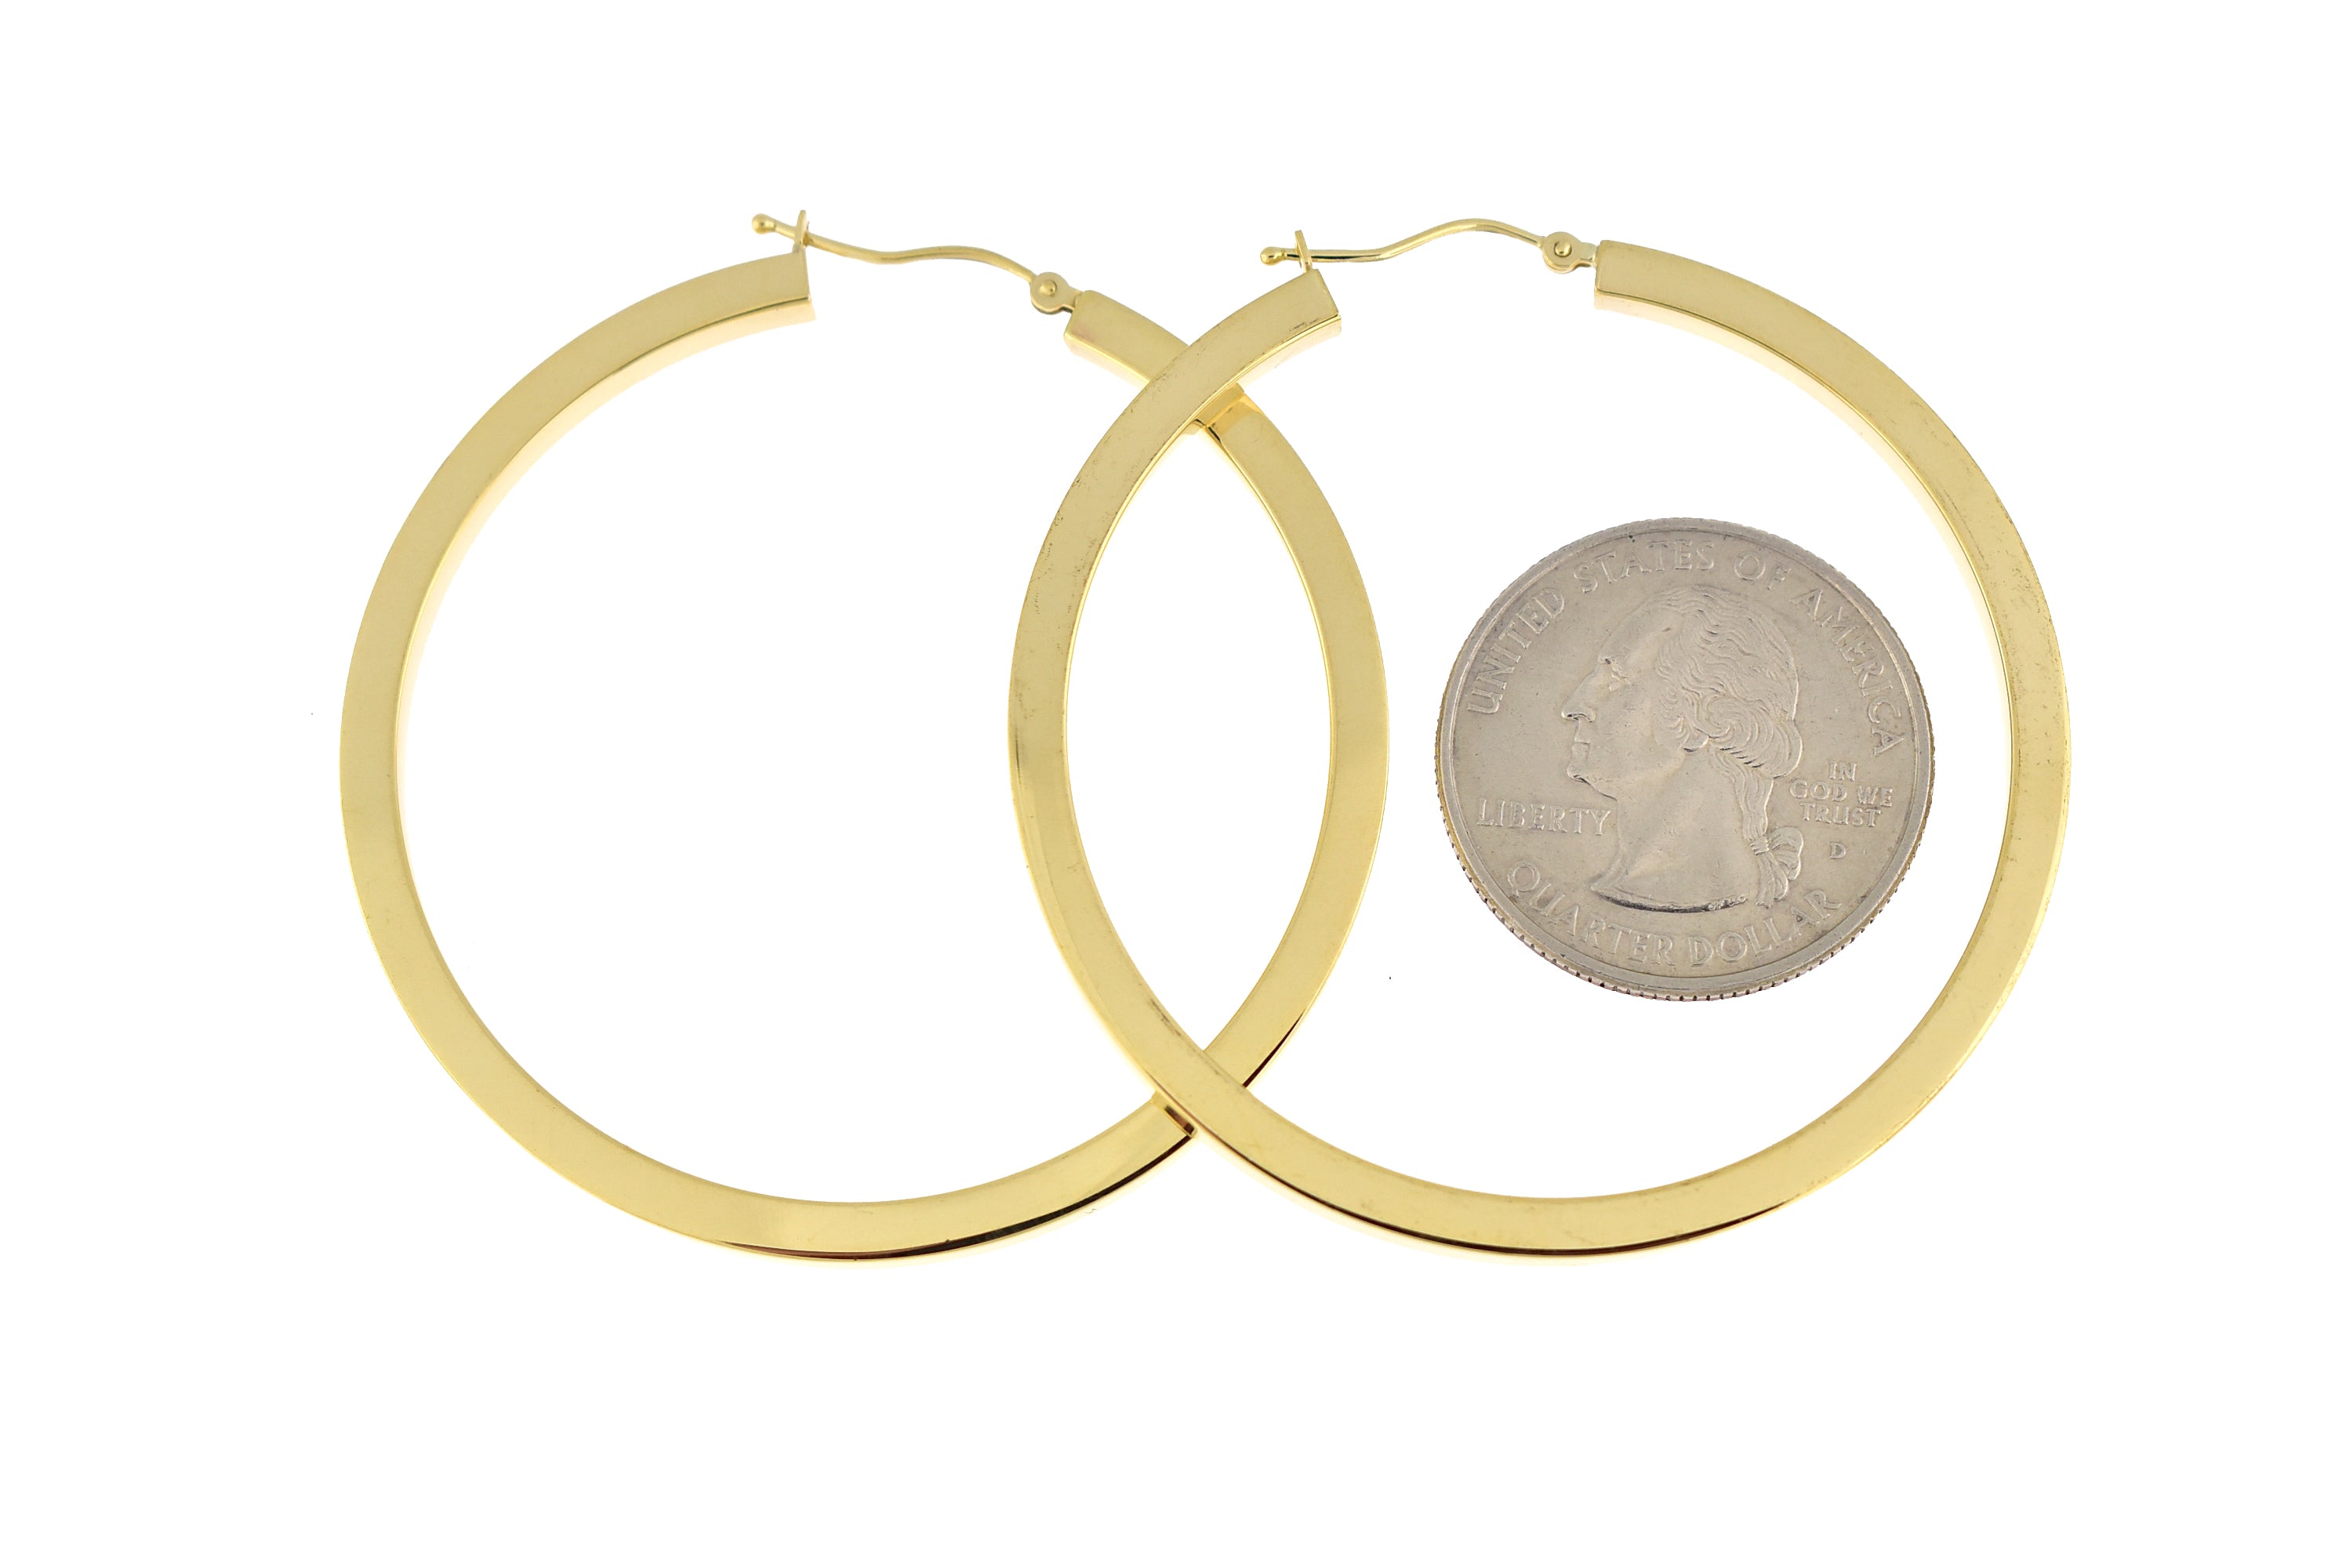 14K Yellow Gold 50mm Square Tube Round Hollow Hoop Earrings